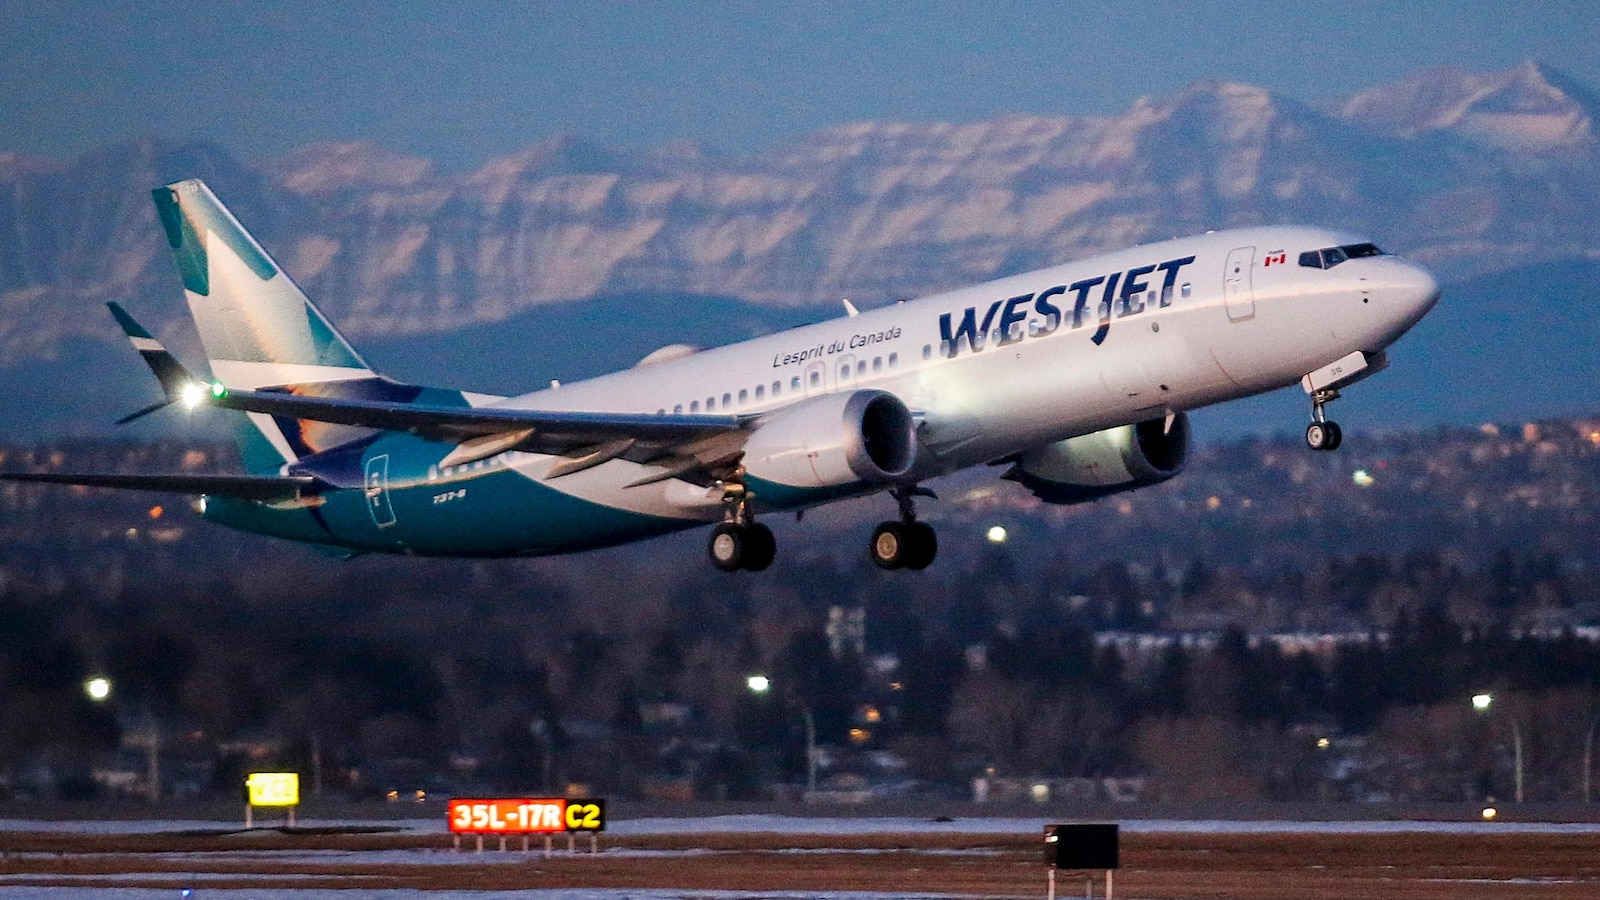 WestJet flight cancellations increase due to ongoing airline strike impacting travelers